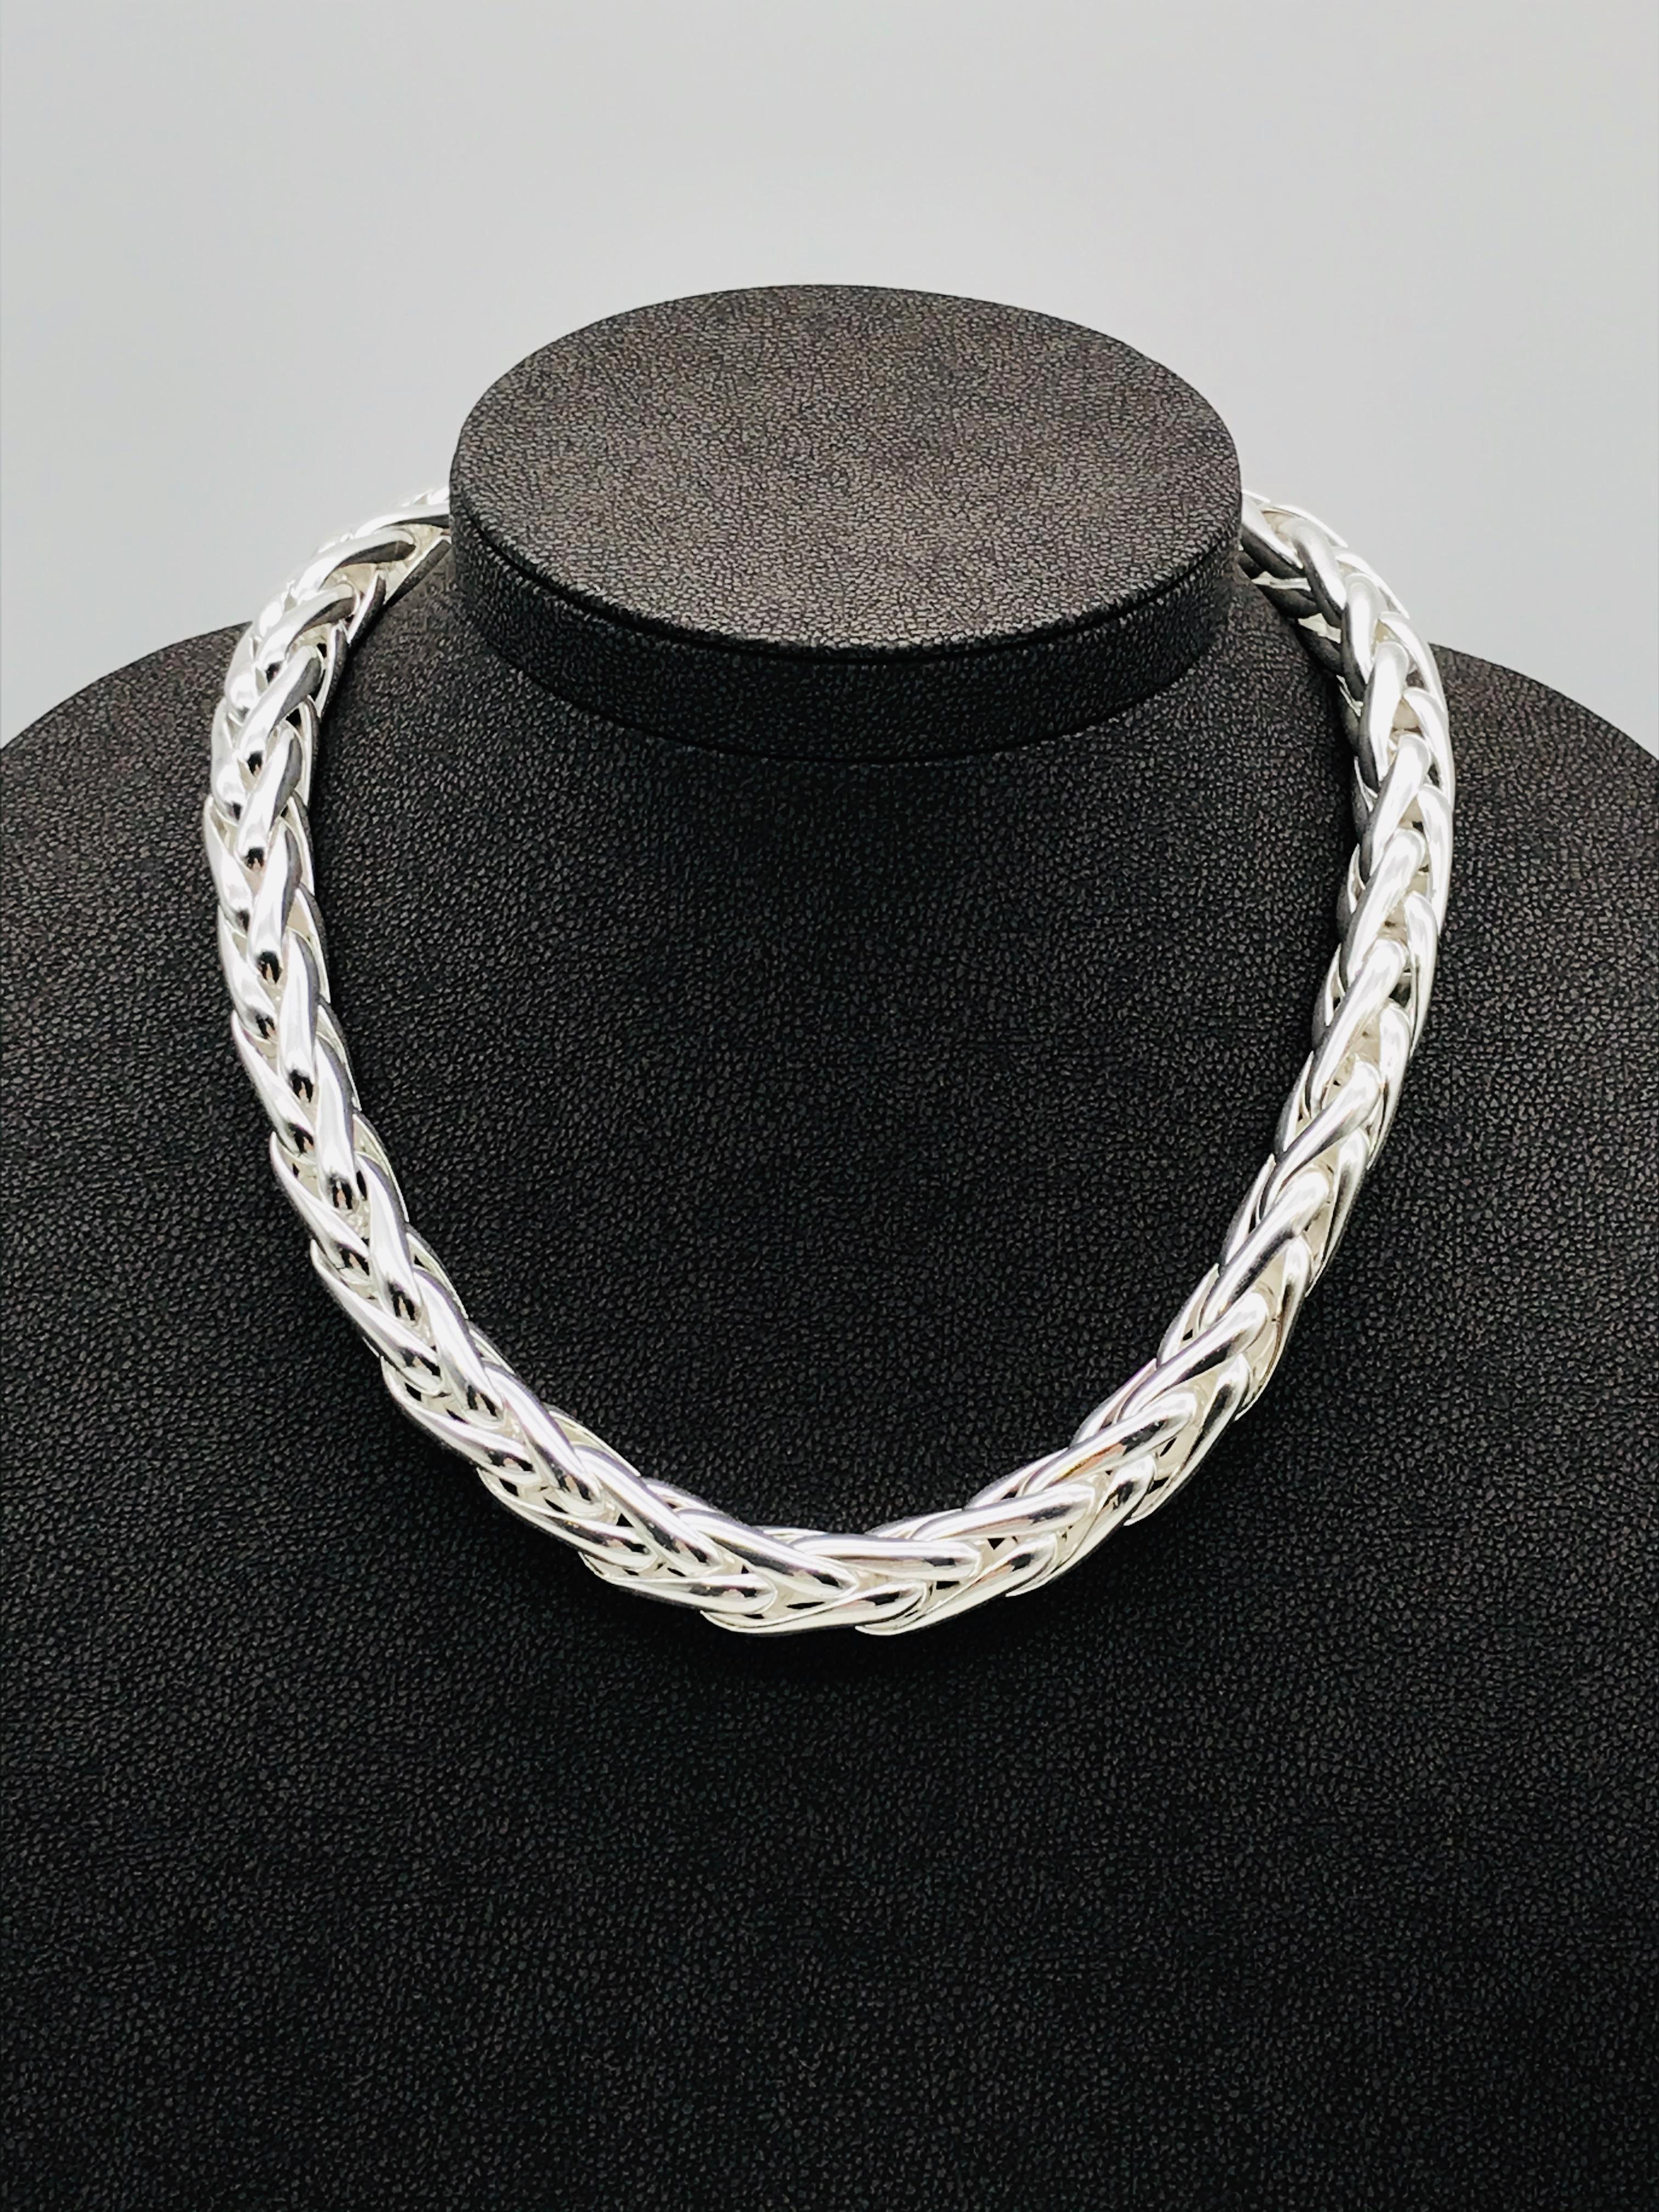 Women's Braided Mesh Silver Necklace For Sale